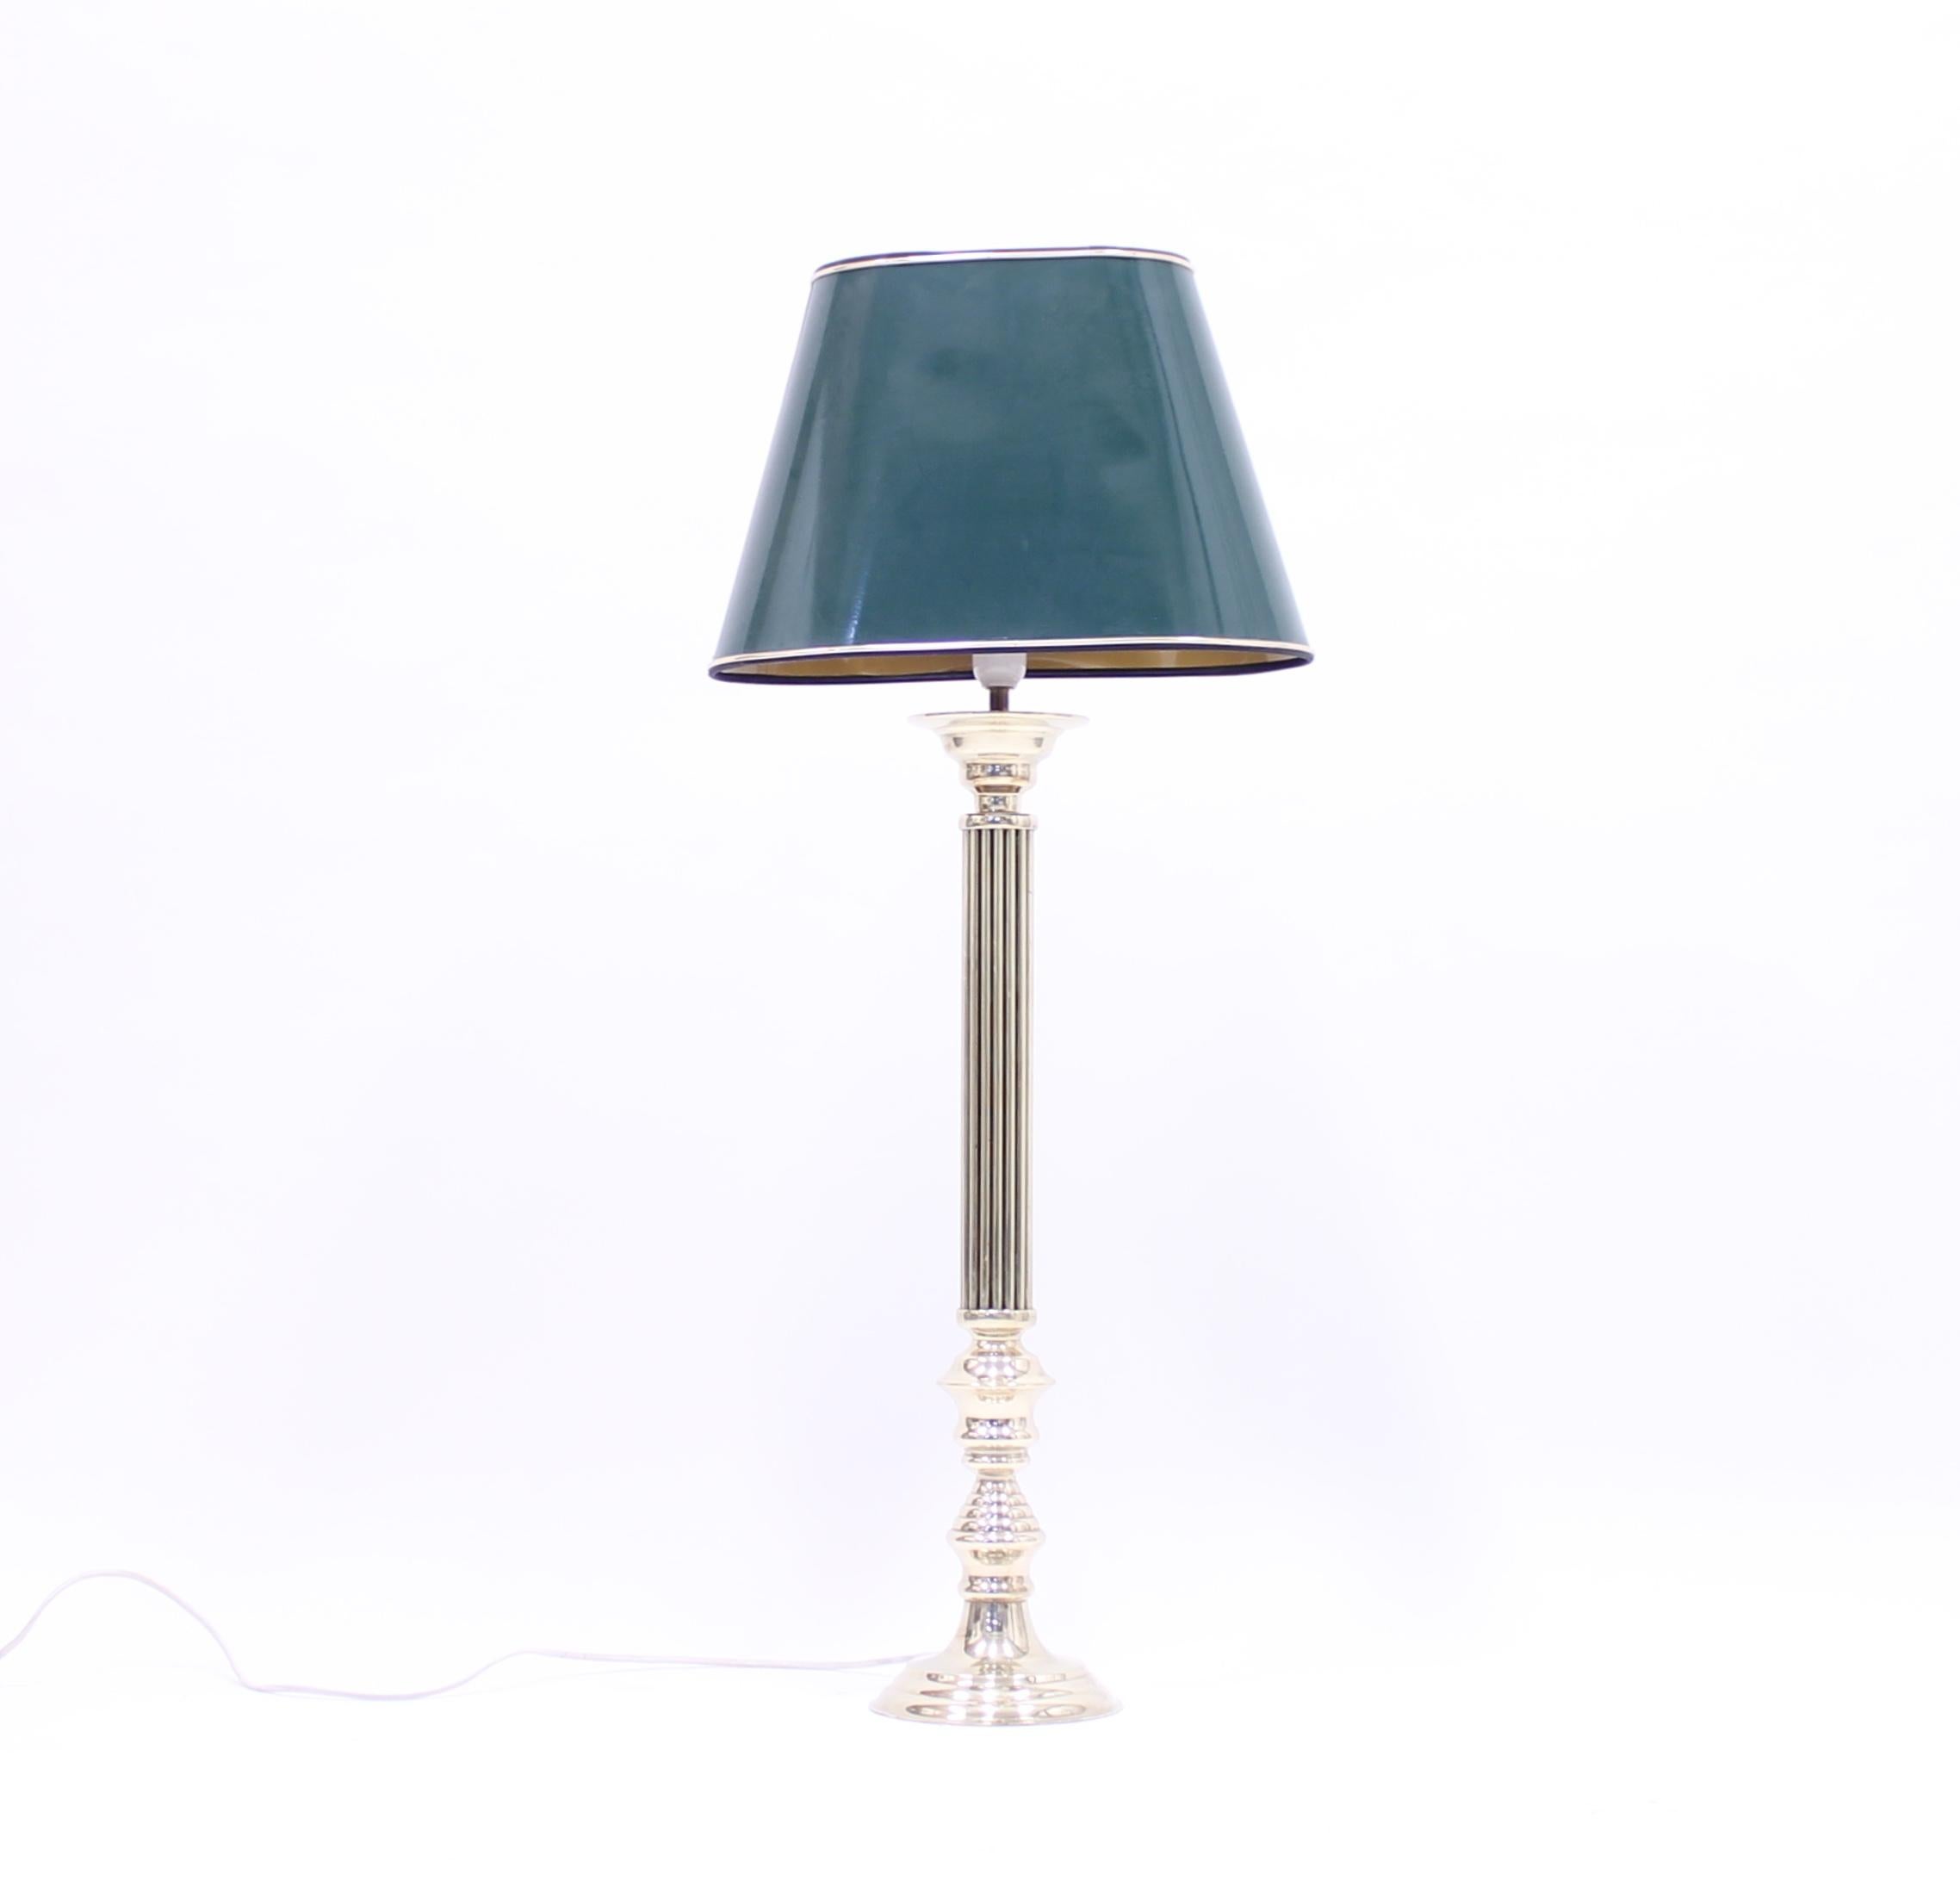 Tall brass table lamp in a neoclassical style with a green lacquered shade. Made in the 1970s. Most likely Swedish. Very good vintage condition with minor ware.
  